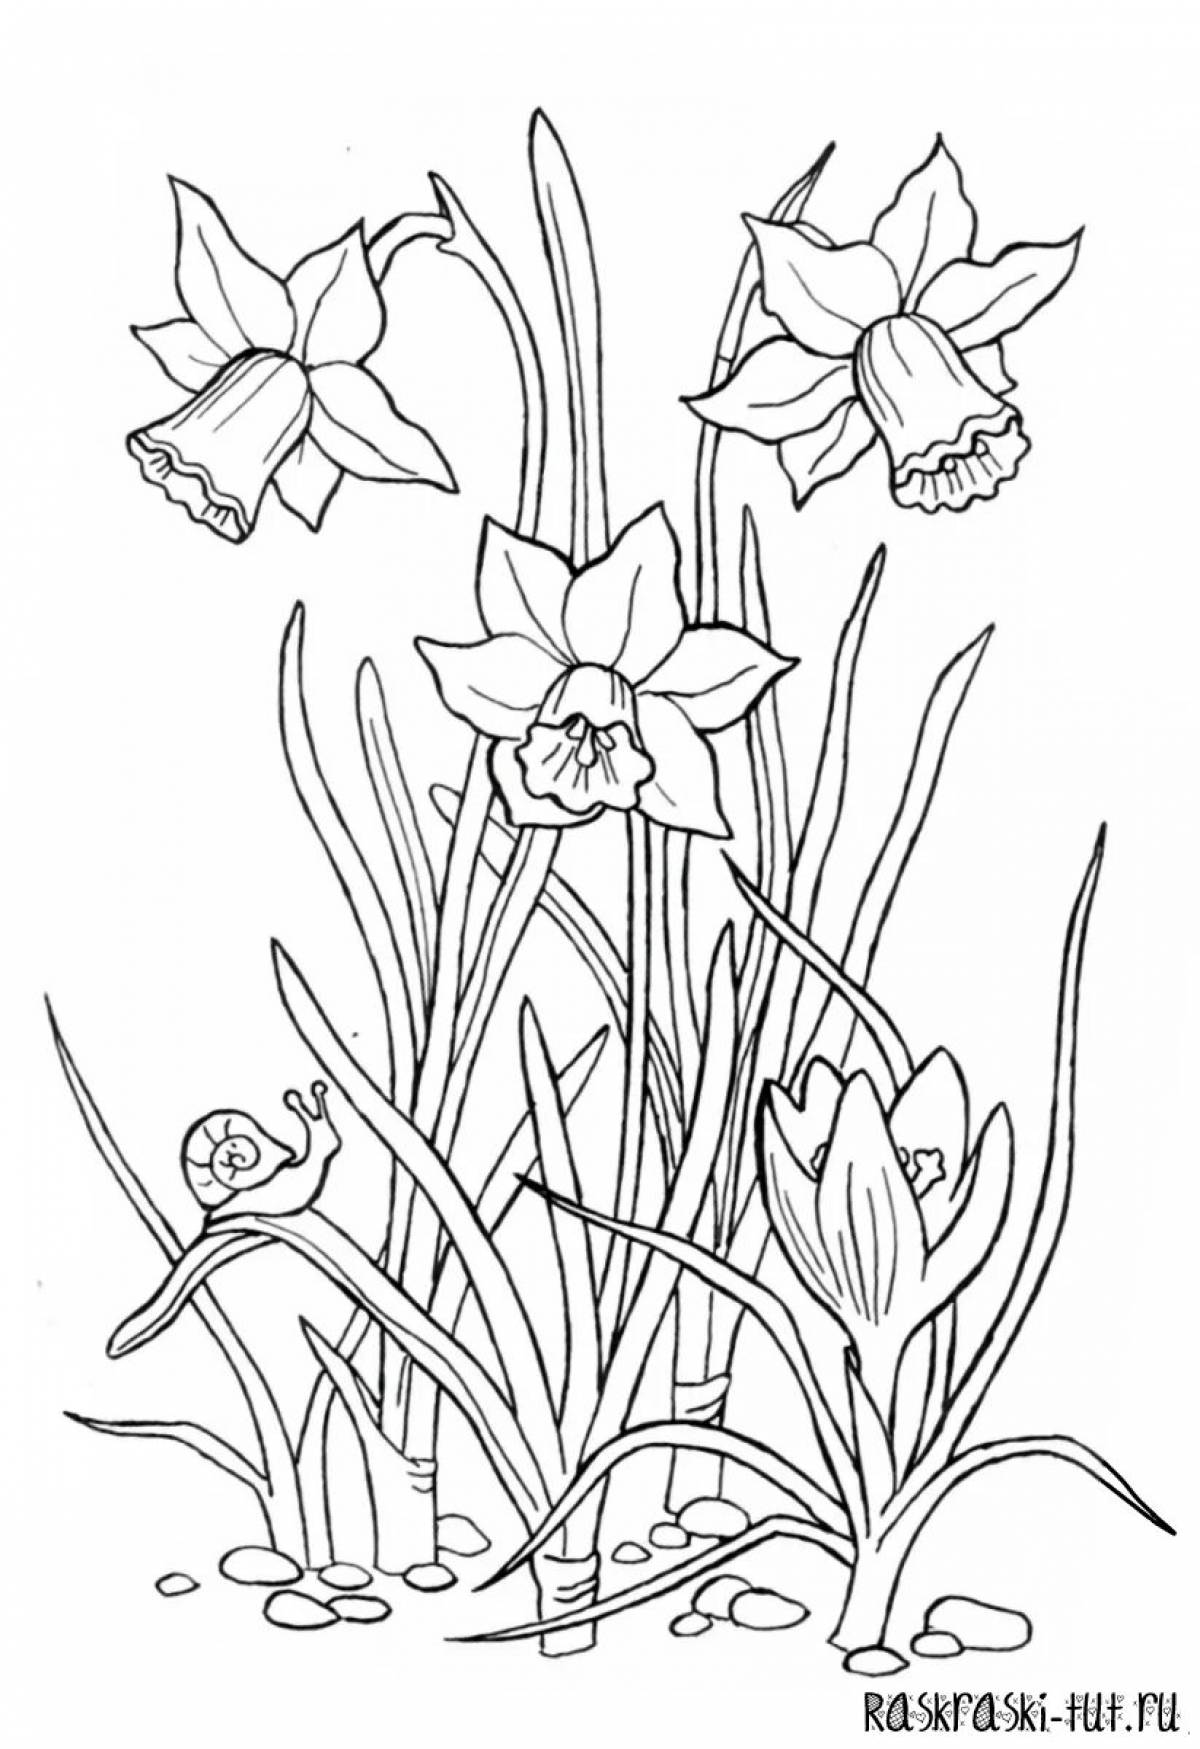 Fancy narcissus flower coloring page